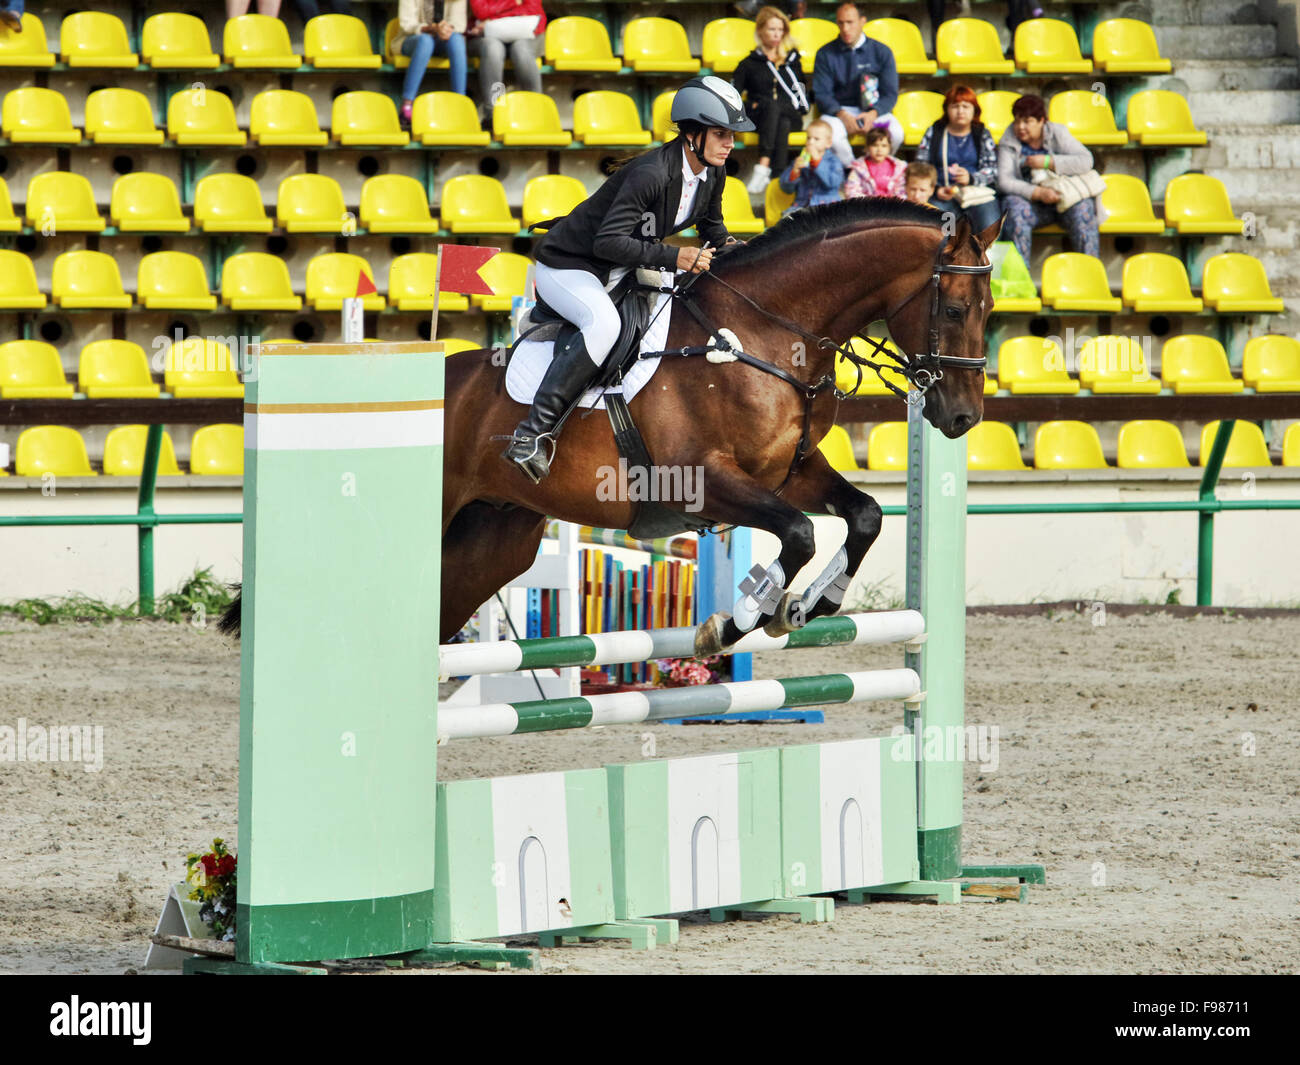 Women partecipating in a show jumping competition Stock Photo